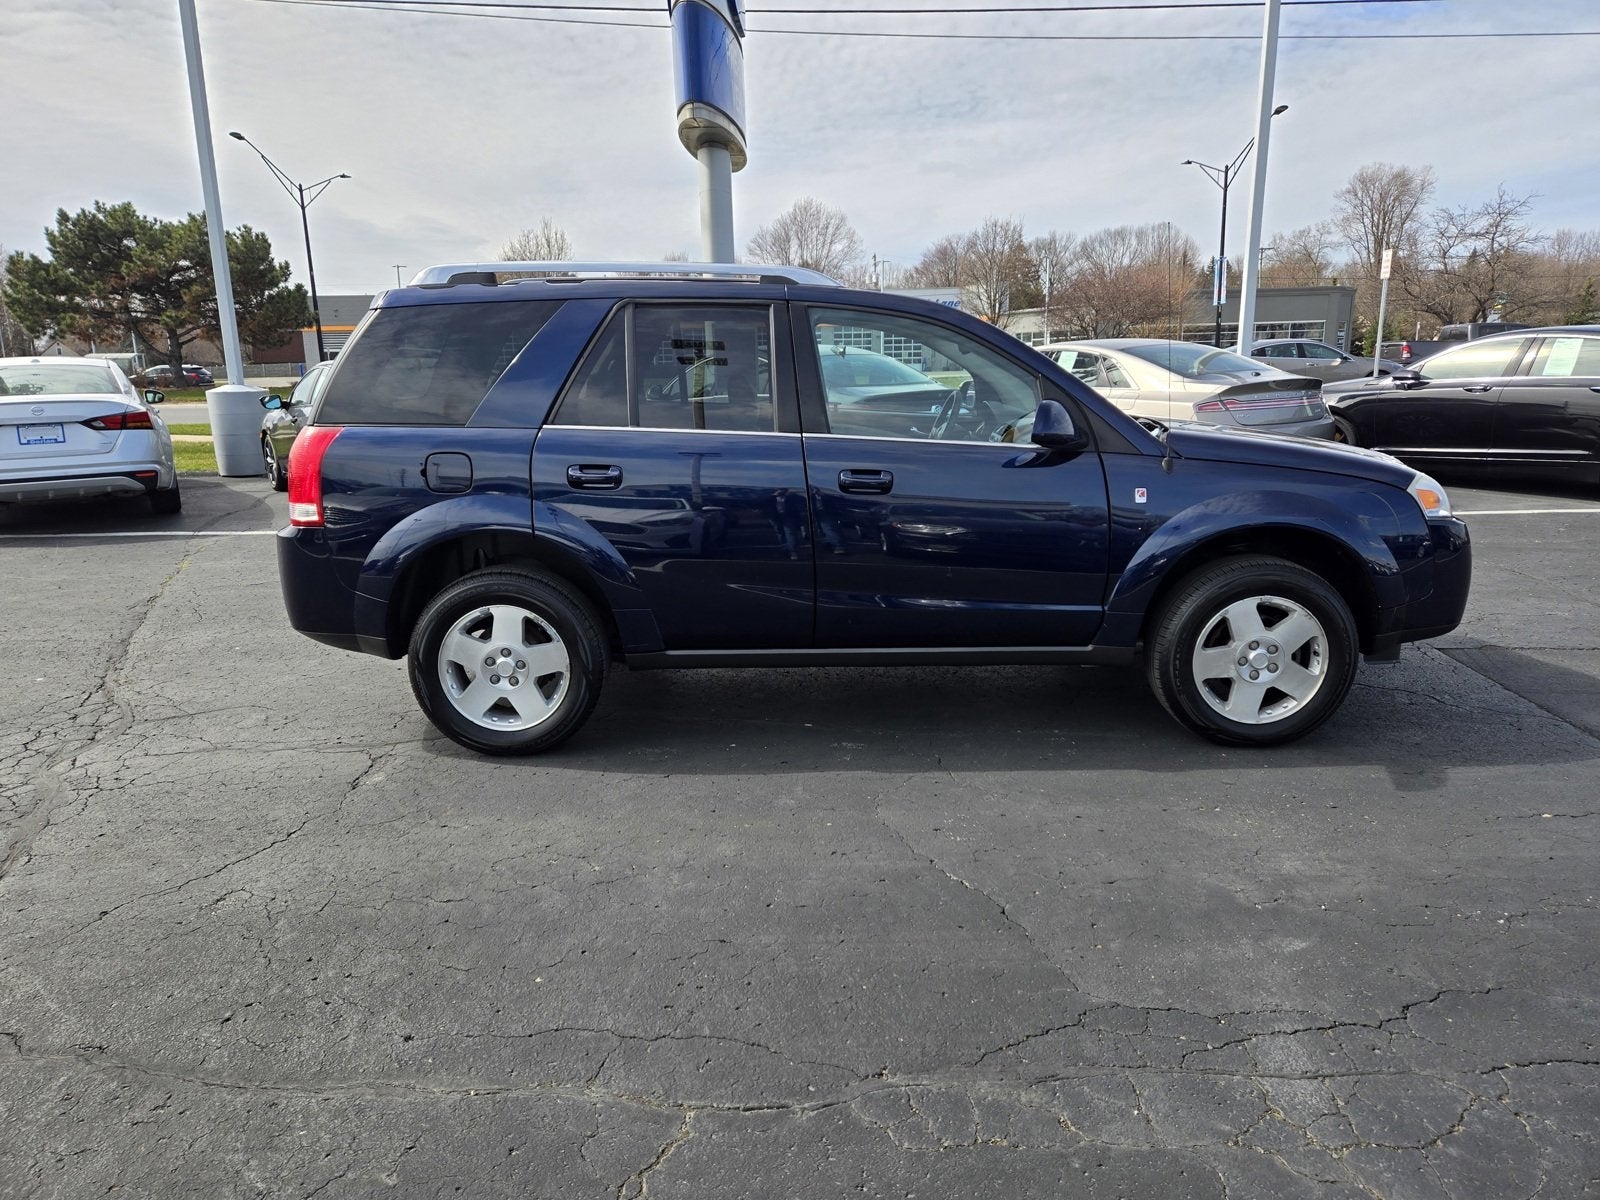 Used 2007 Saturn VUE 3.5L with VIN 5GZCZ53437S831732 for sale in Clinton Township, MI